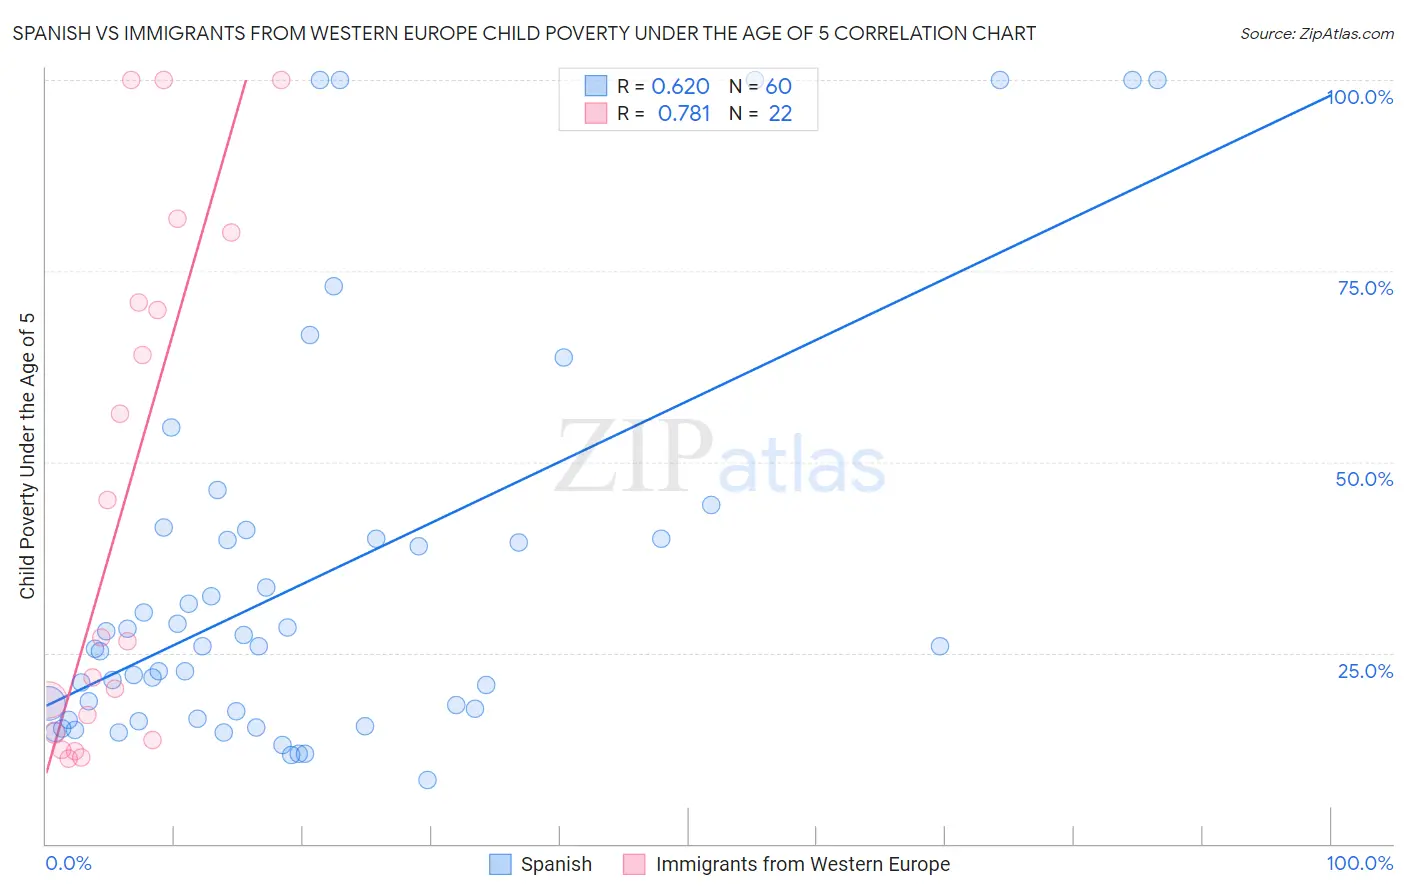 Spanish vs Immigrants from Western Europe Child Poverty Under the Age of 5